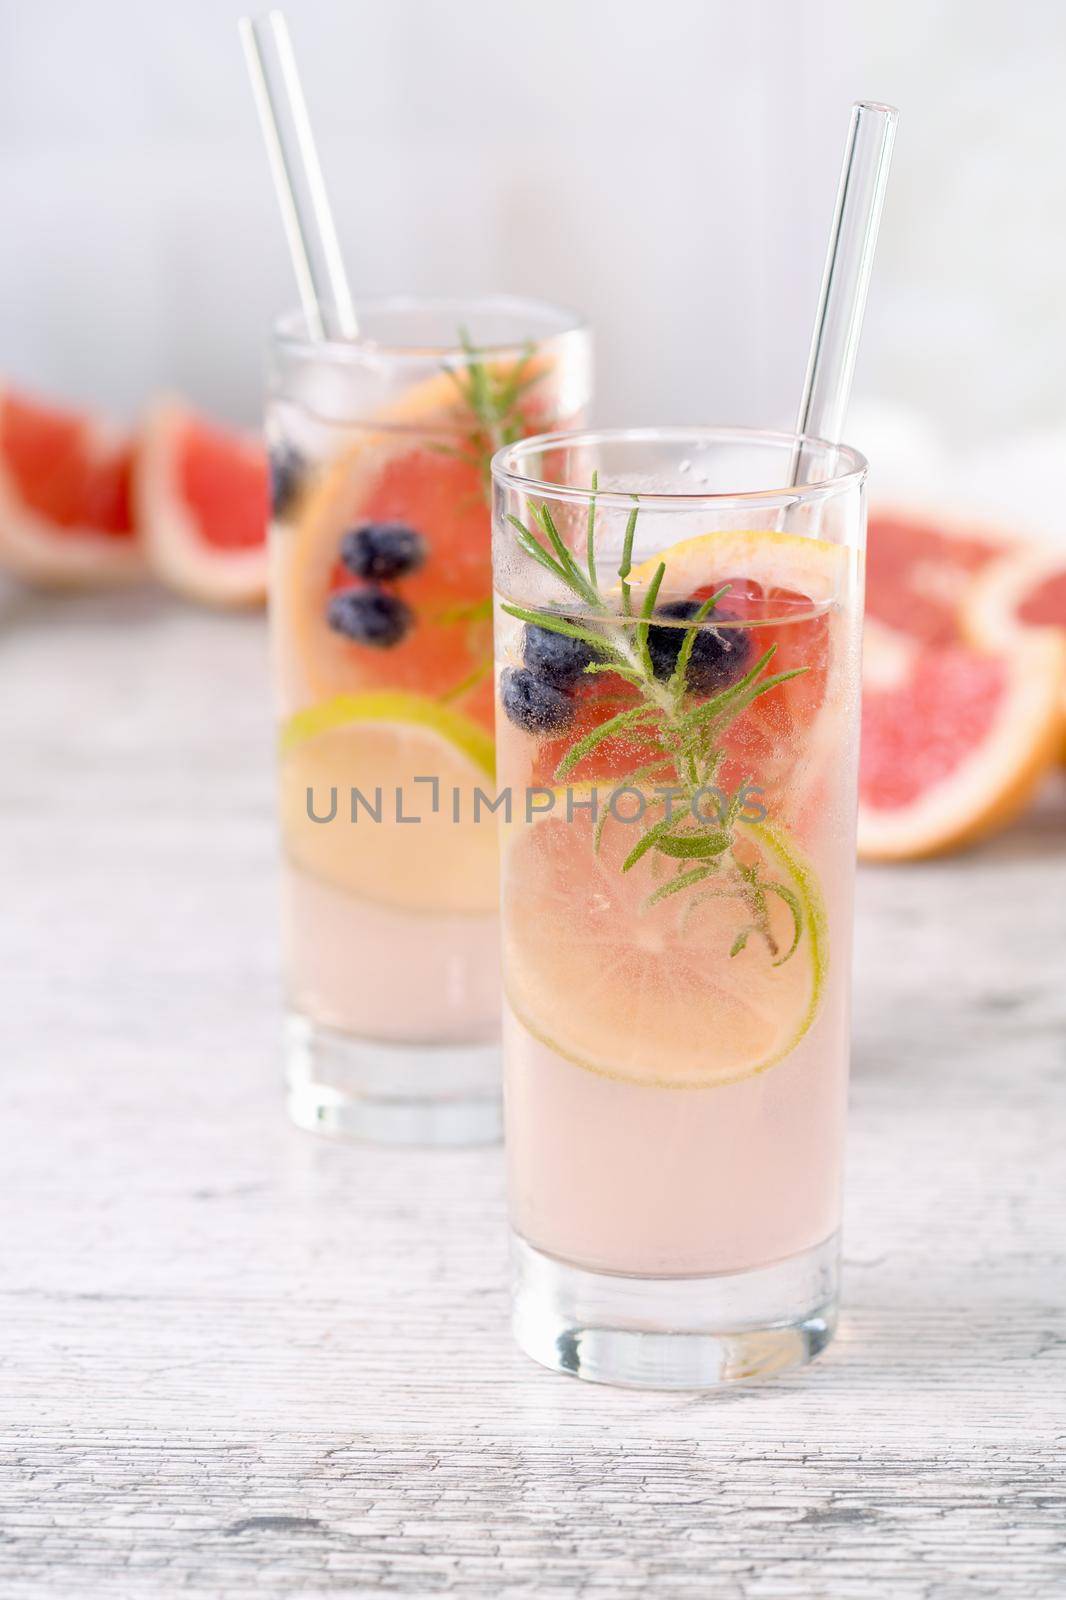 Paloma with blueberries and citrus by Apolonia